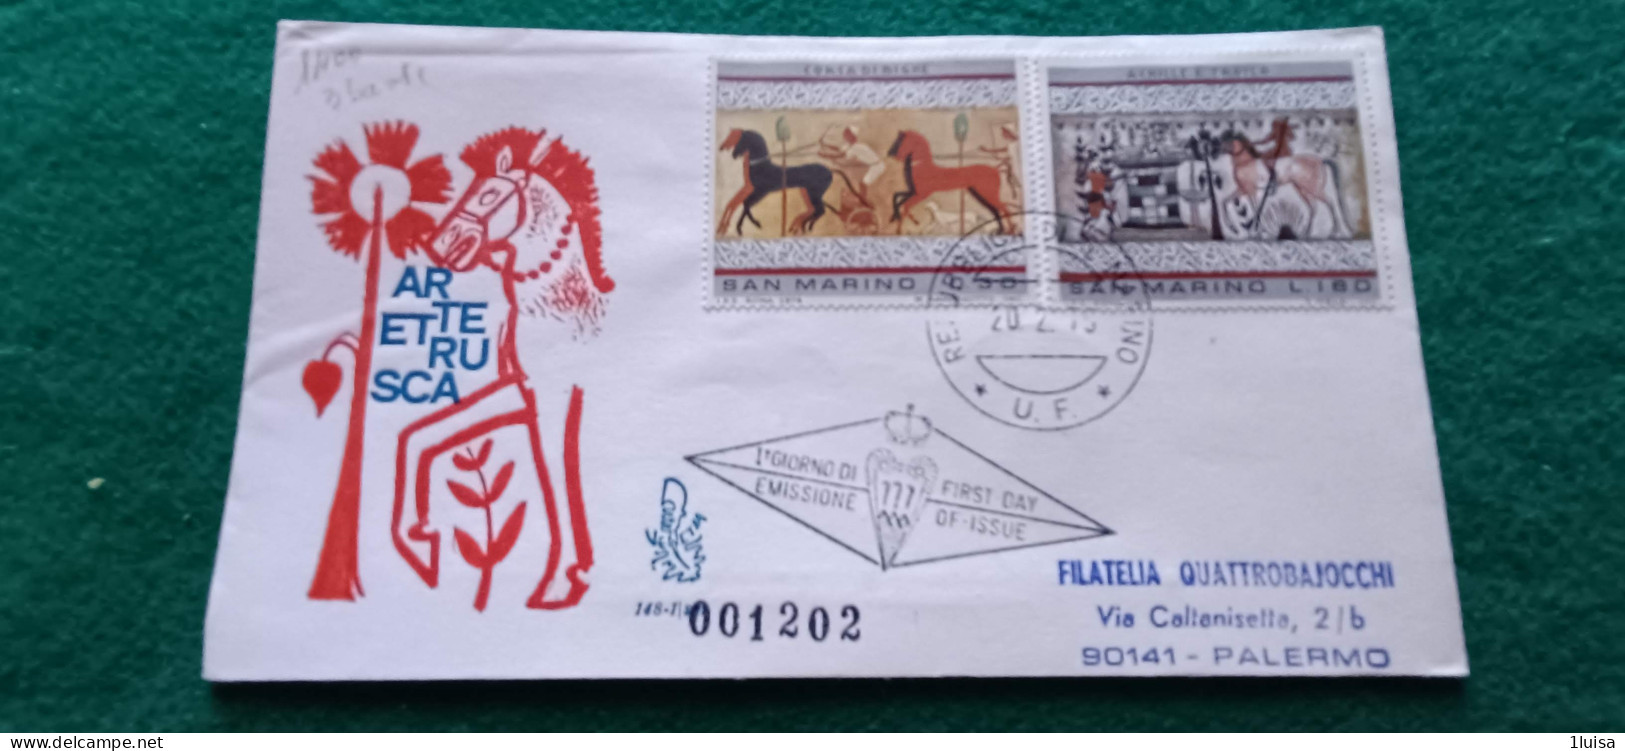 SAN MARINO 20/2/75 Arte Etrusca - Express Letter Stamps